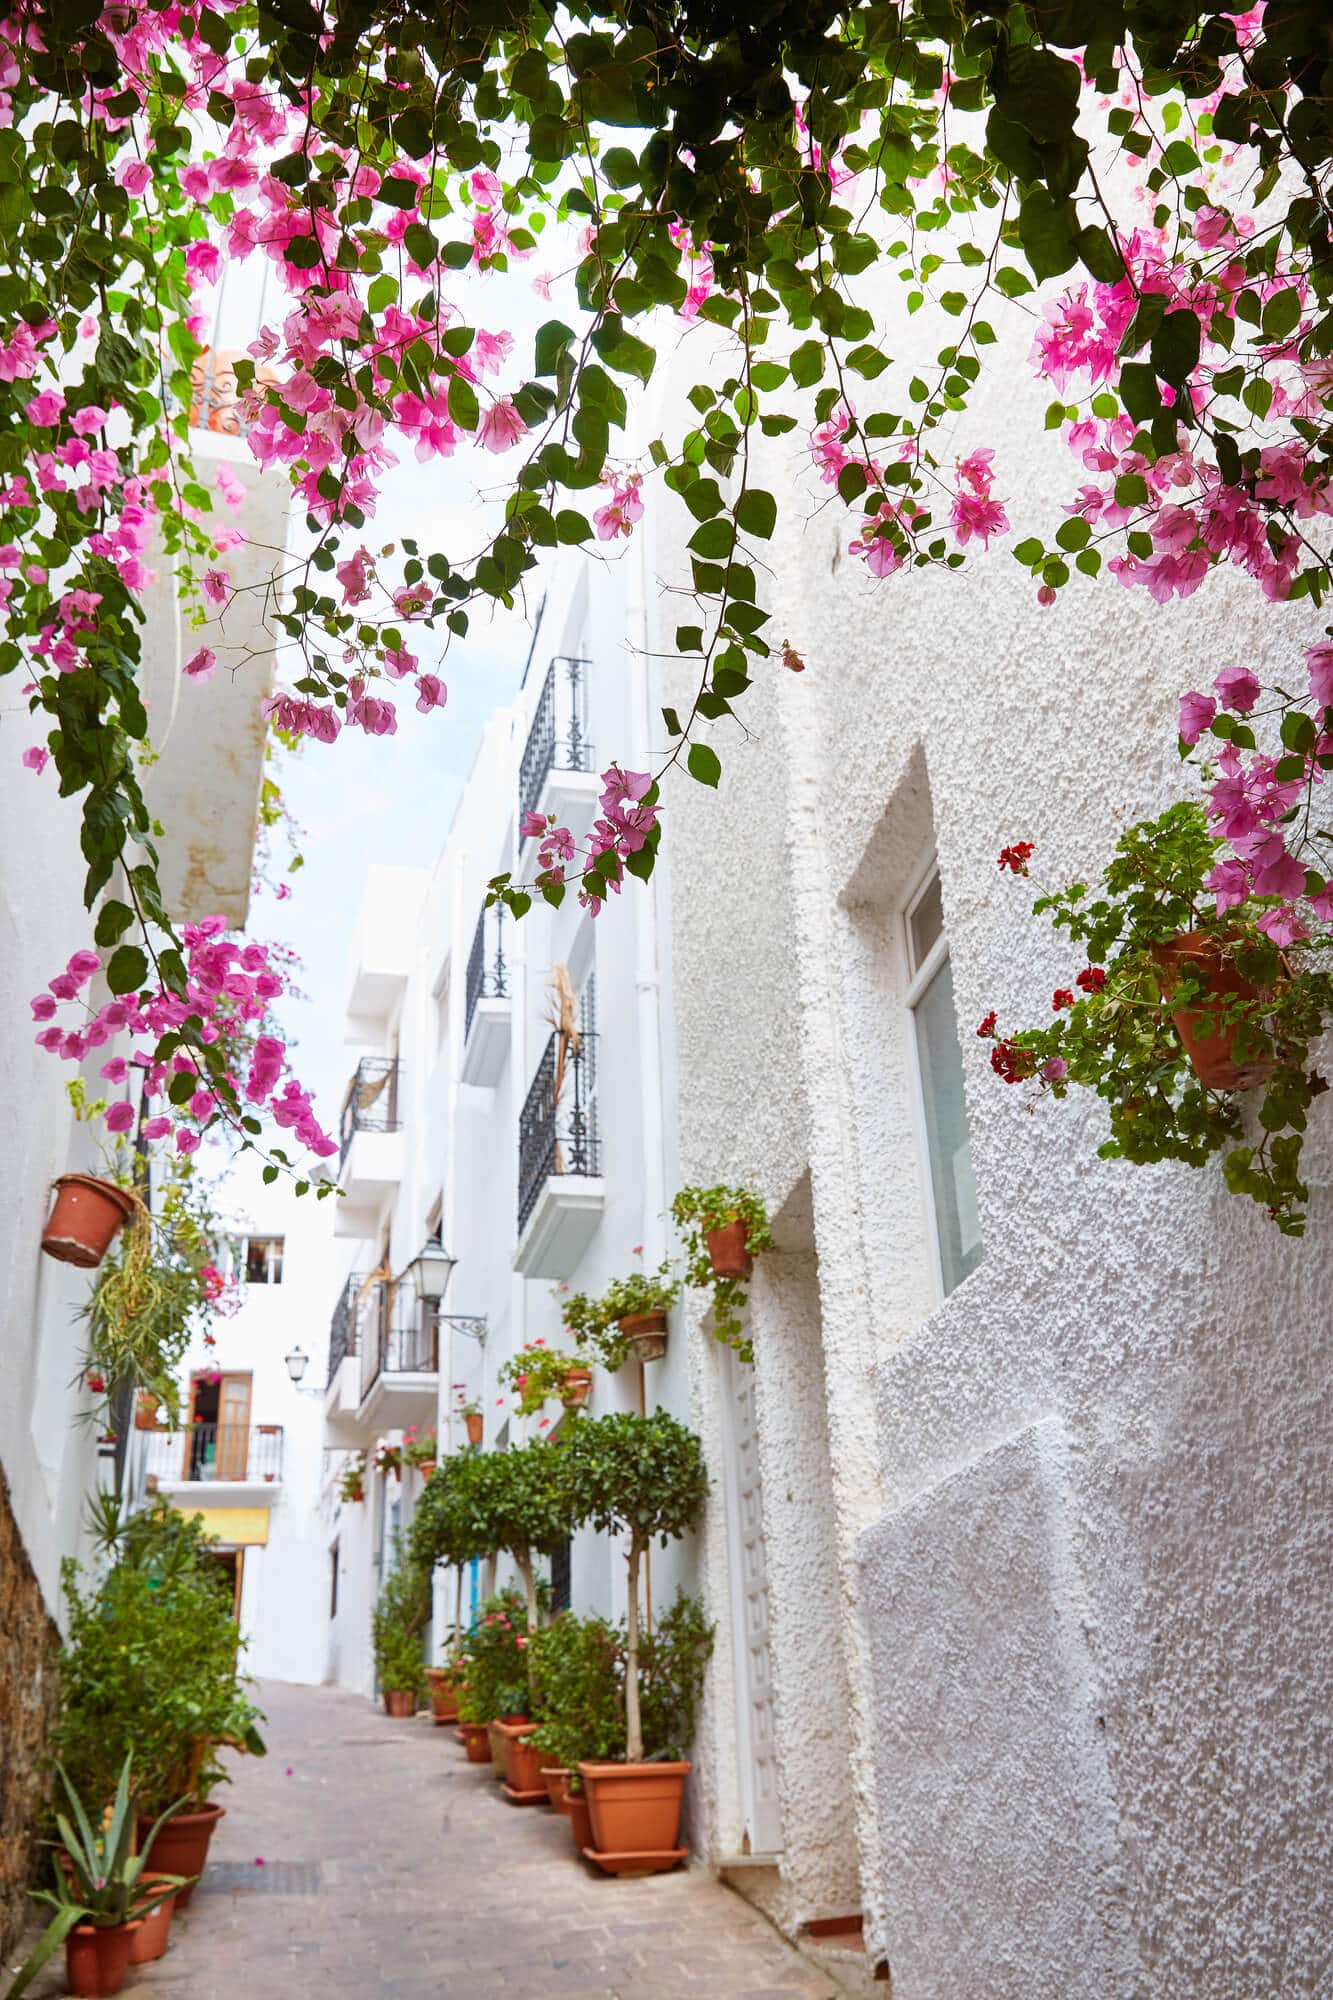 View of a narrow alley between white houses covered in Bougainvillea in Mojácar Pueblo in Almeria - One of Spain's most beautiful white villages